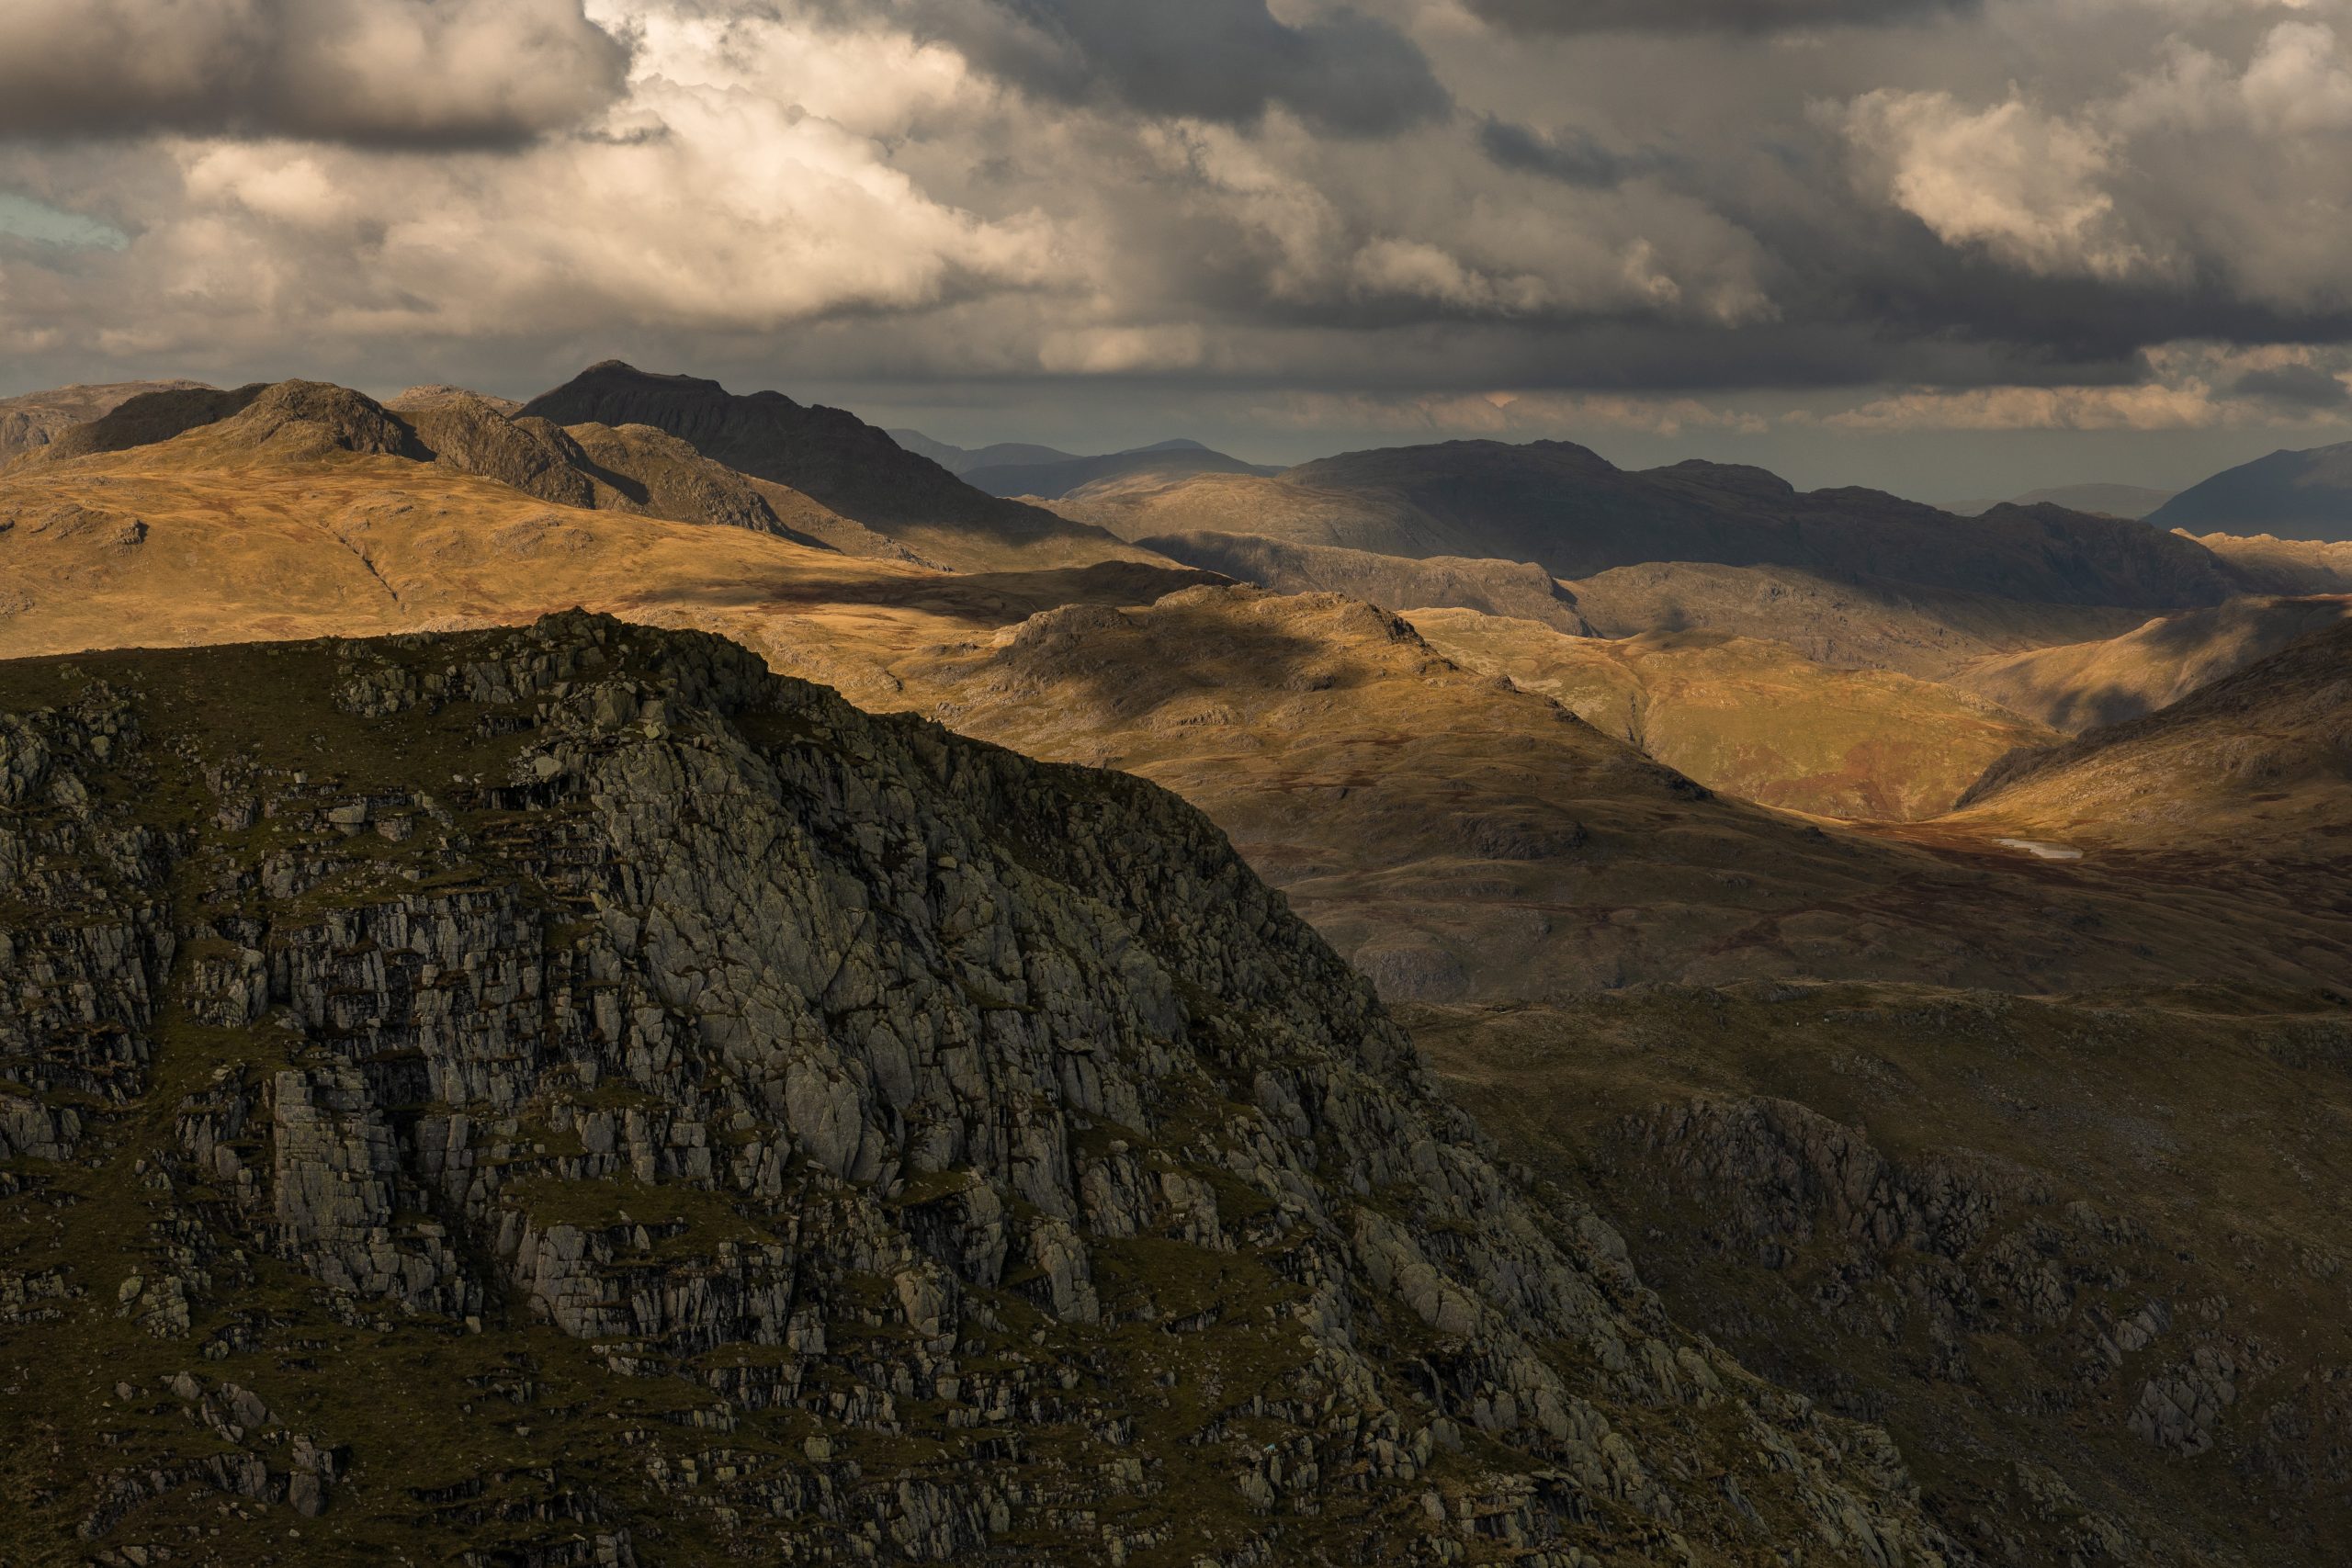 Bowfell and Crinkle Crags seen from Swirl How in the Lake District